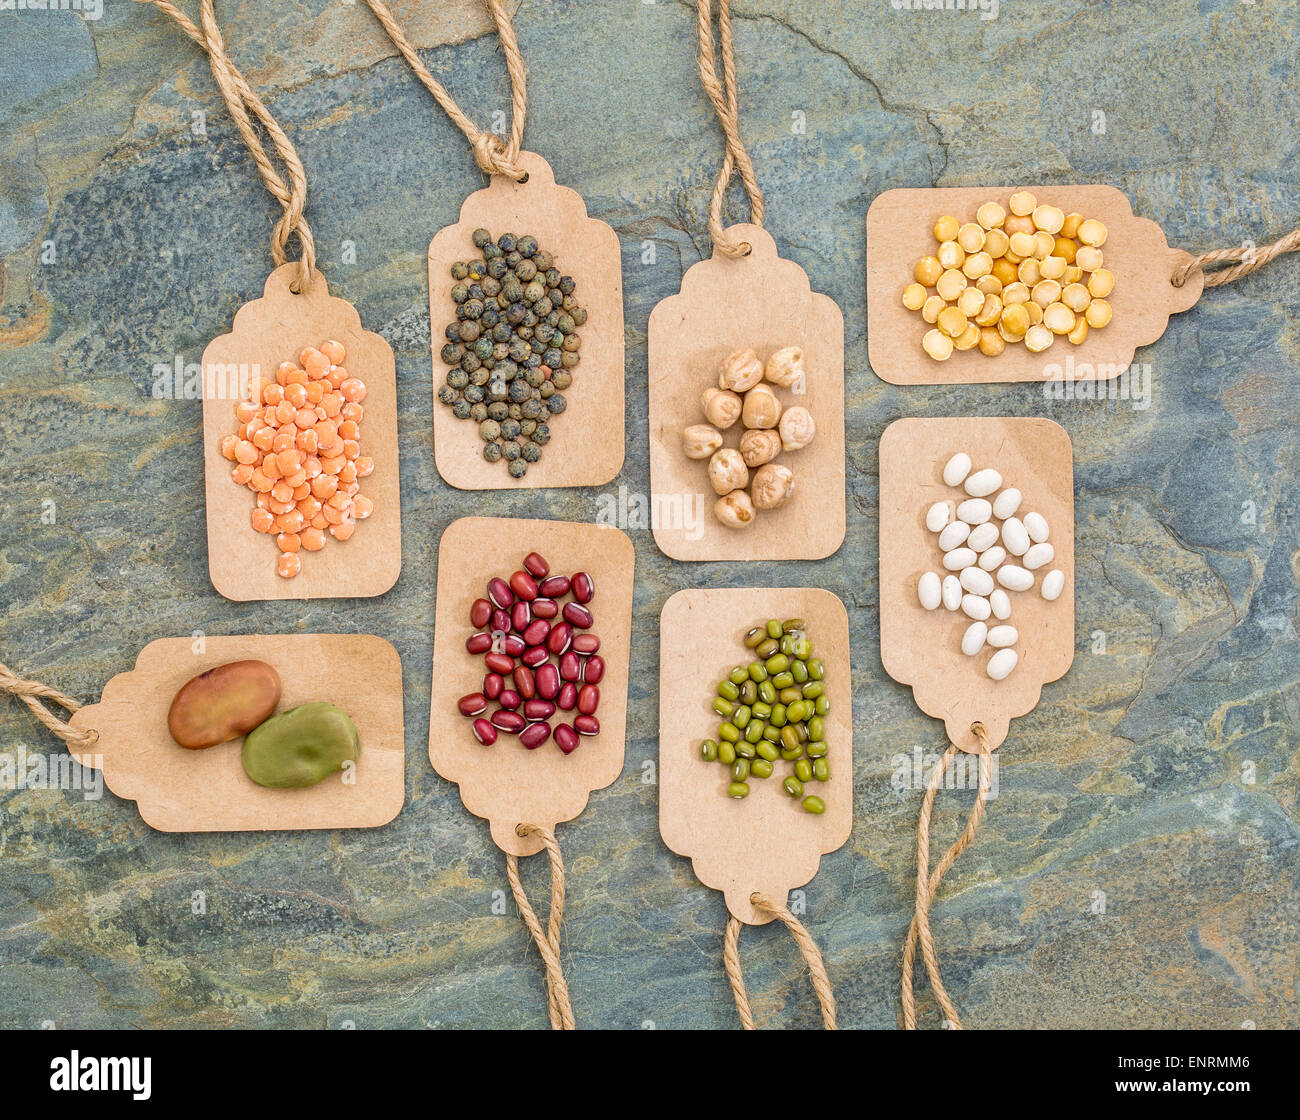 legume abstract (fava bean, red lentils, adzuki bean, soy, mung bean,navy bean, yellow pea, French lentils) - top view of paper  Stock Photo